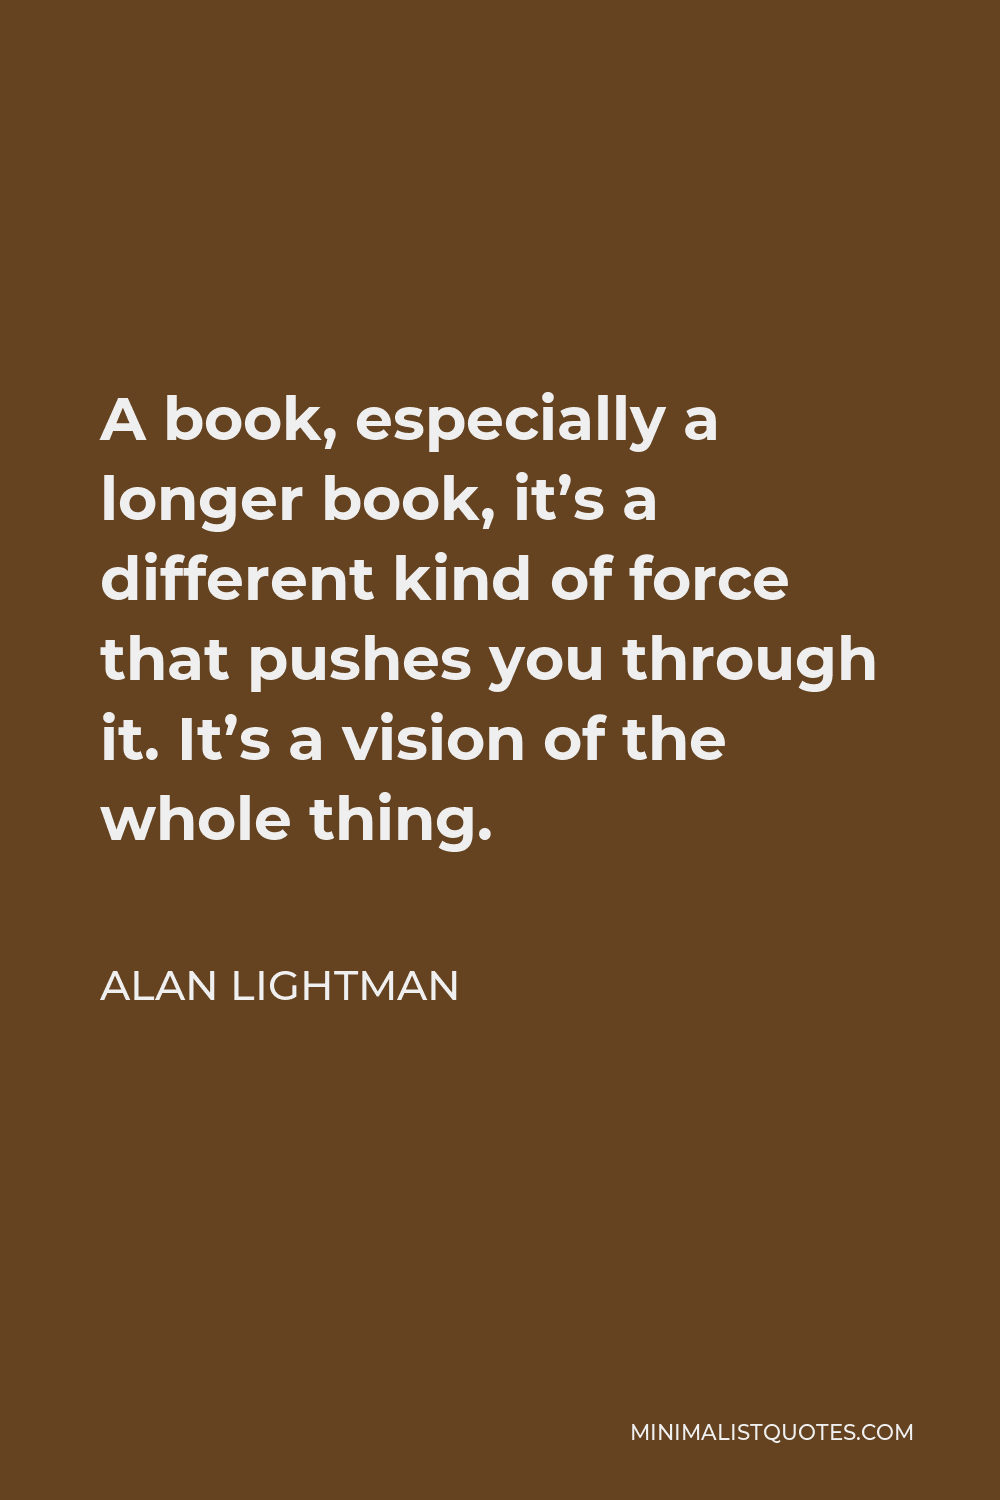 Alan Lightman Quote - A book, especially a longer book, it’s a different kind of force that pushes you through it. It’s a vision of the whole thing.